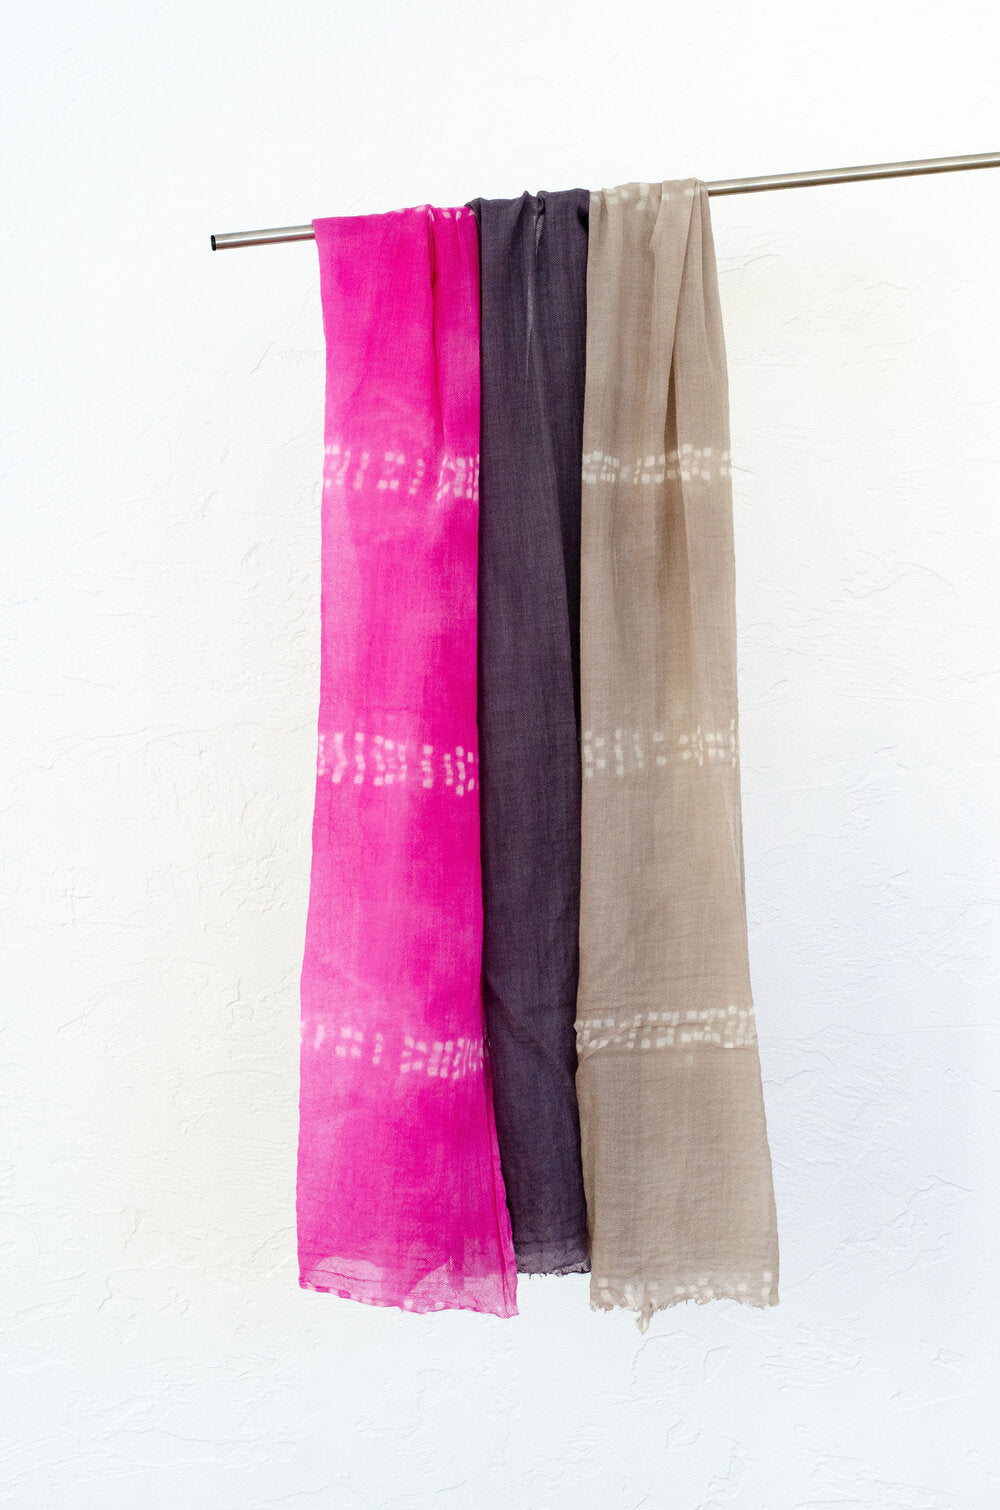 The Wool Gauze Scarf in Sand by 1 Life - Hand-Dyed Wool Scarf for Warm or Cold Weather